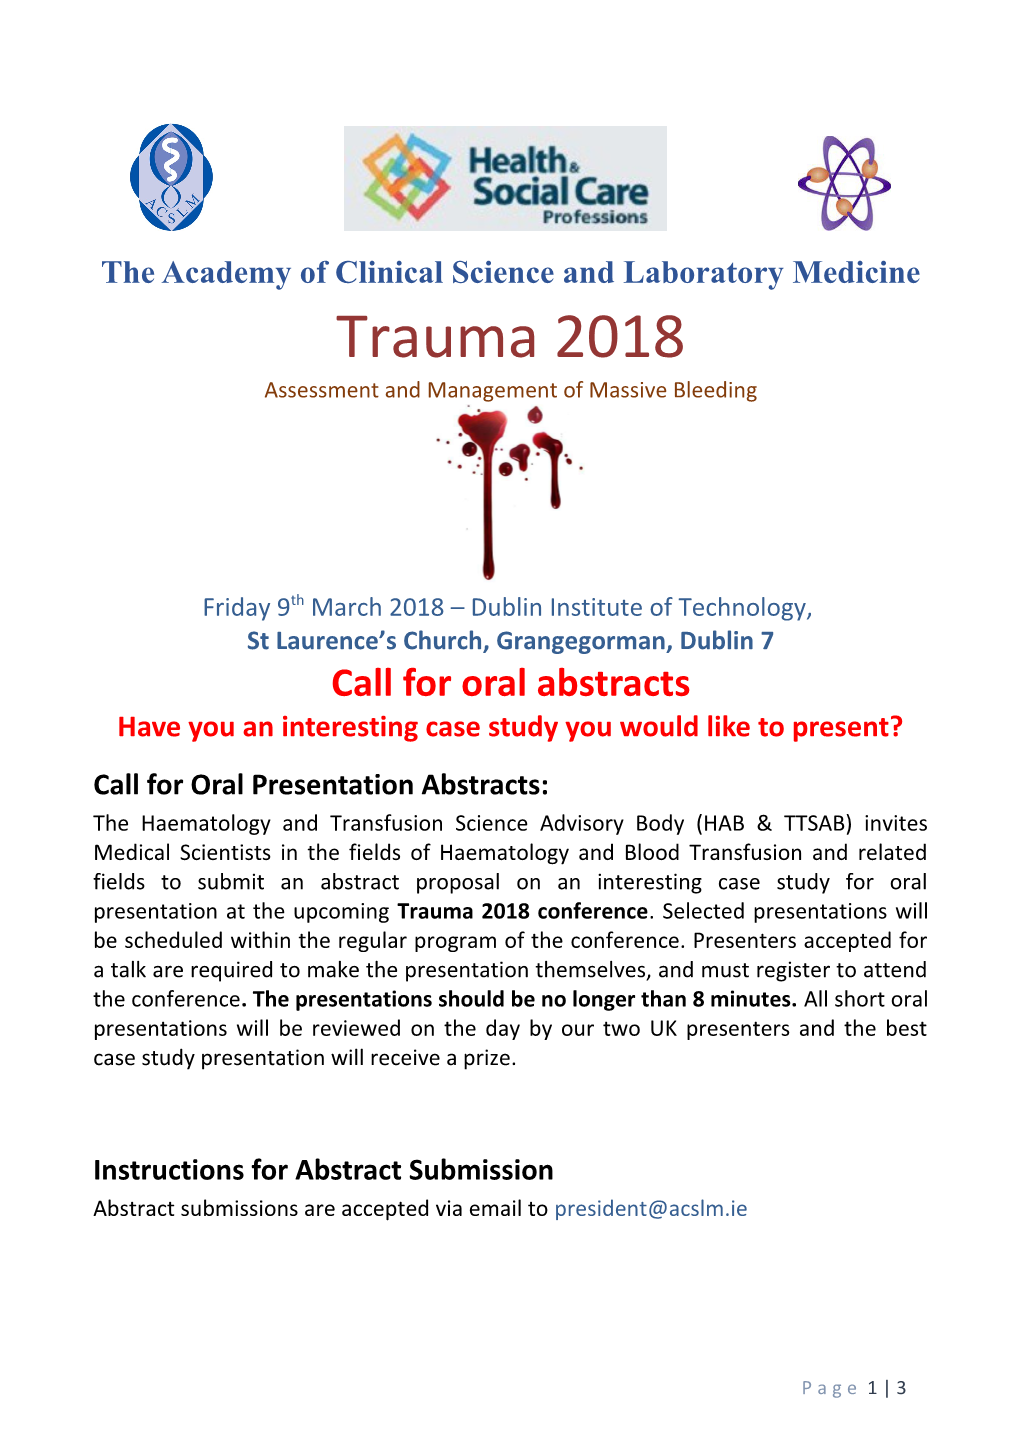 The Academy of Clinical Science and Laboratory Medicine